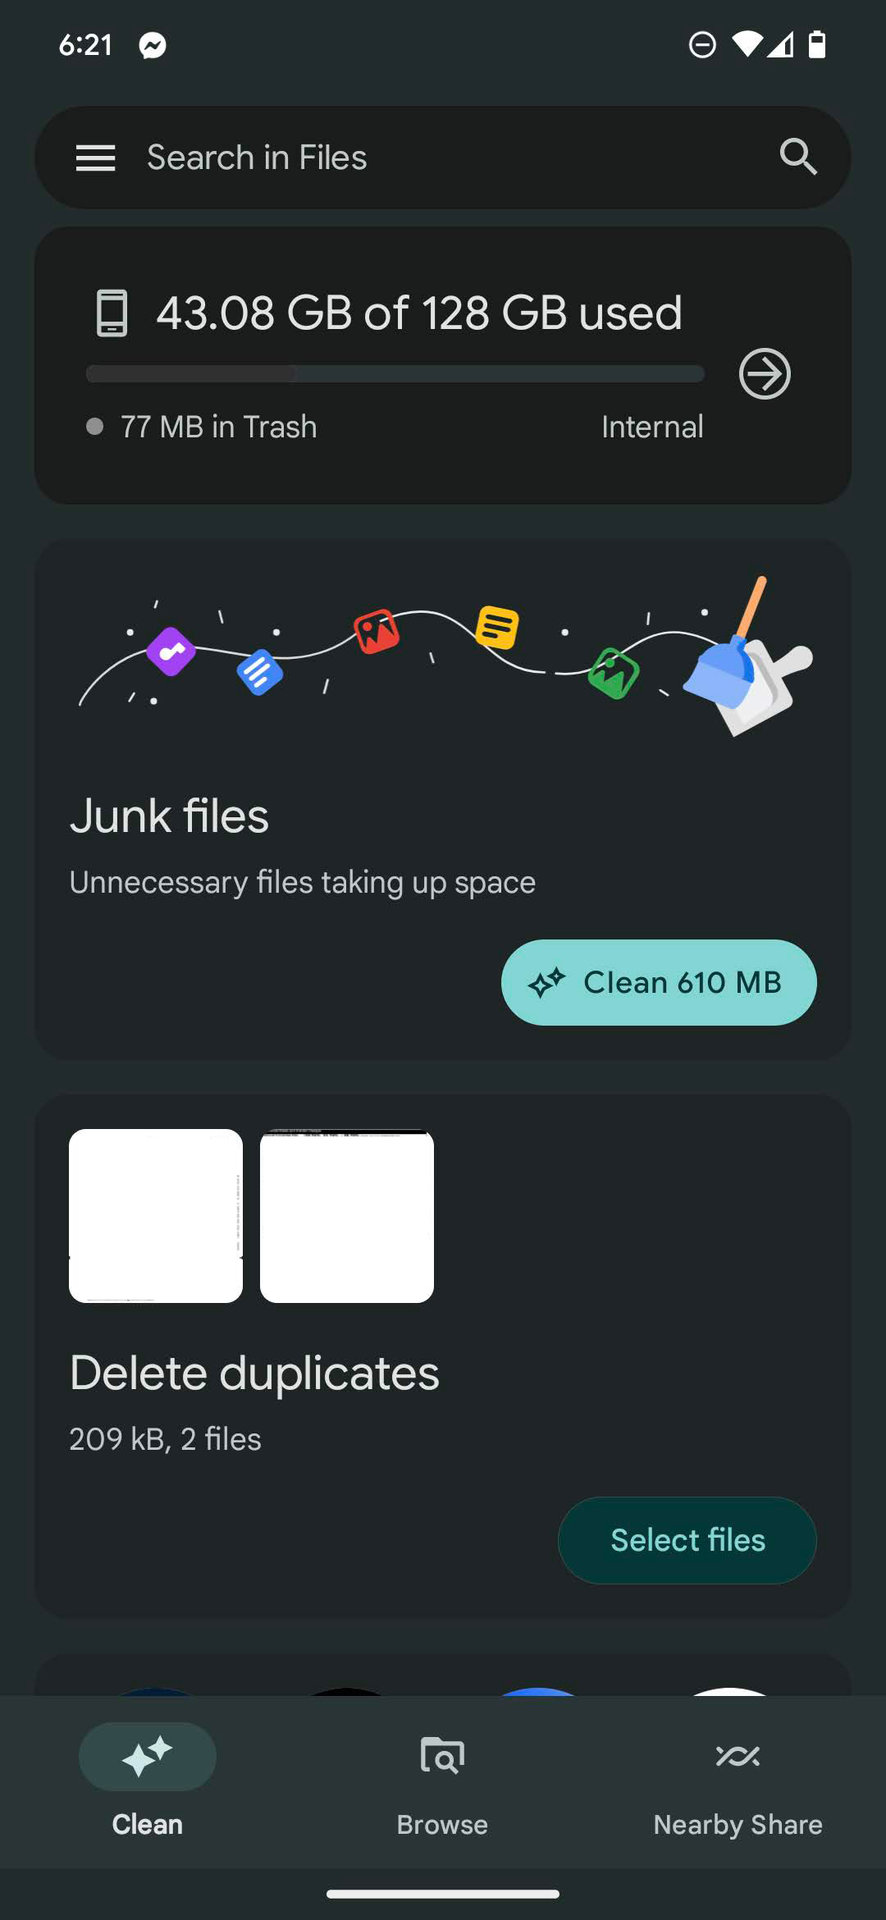 How to use the Files Clean feature 2